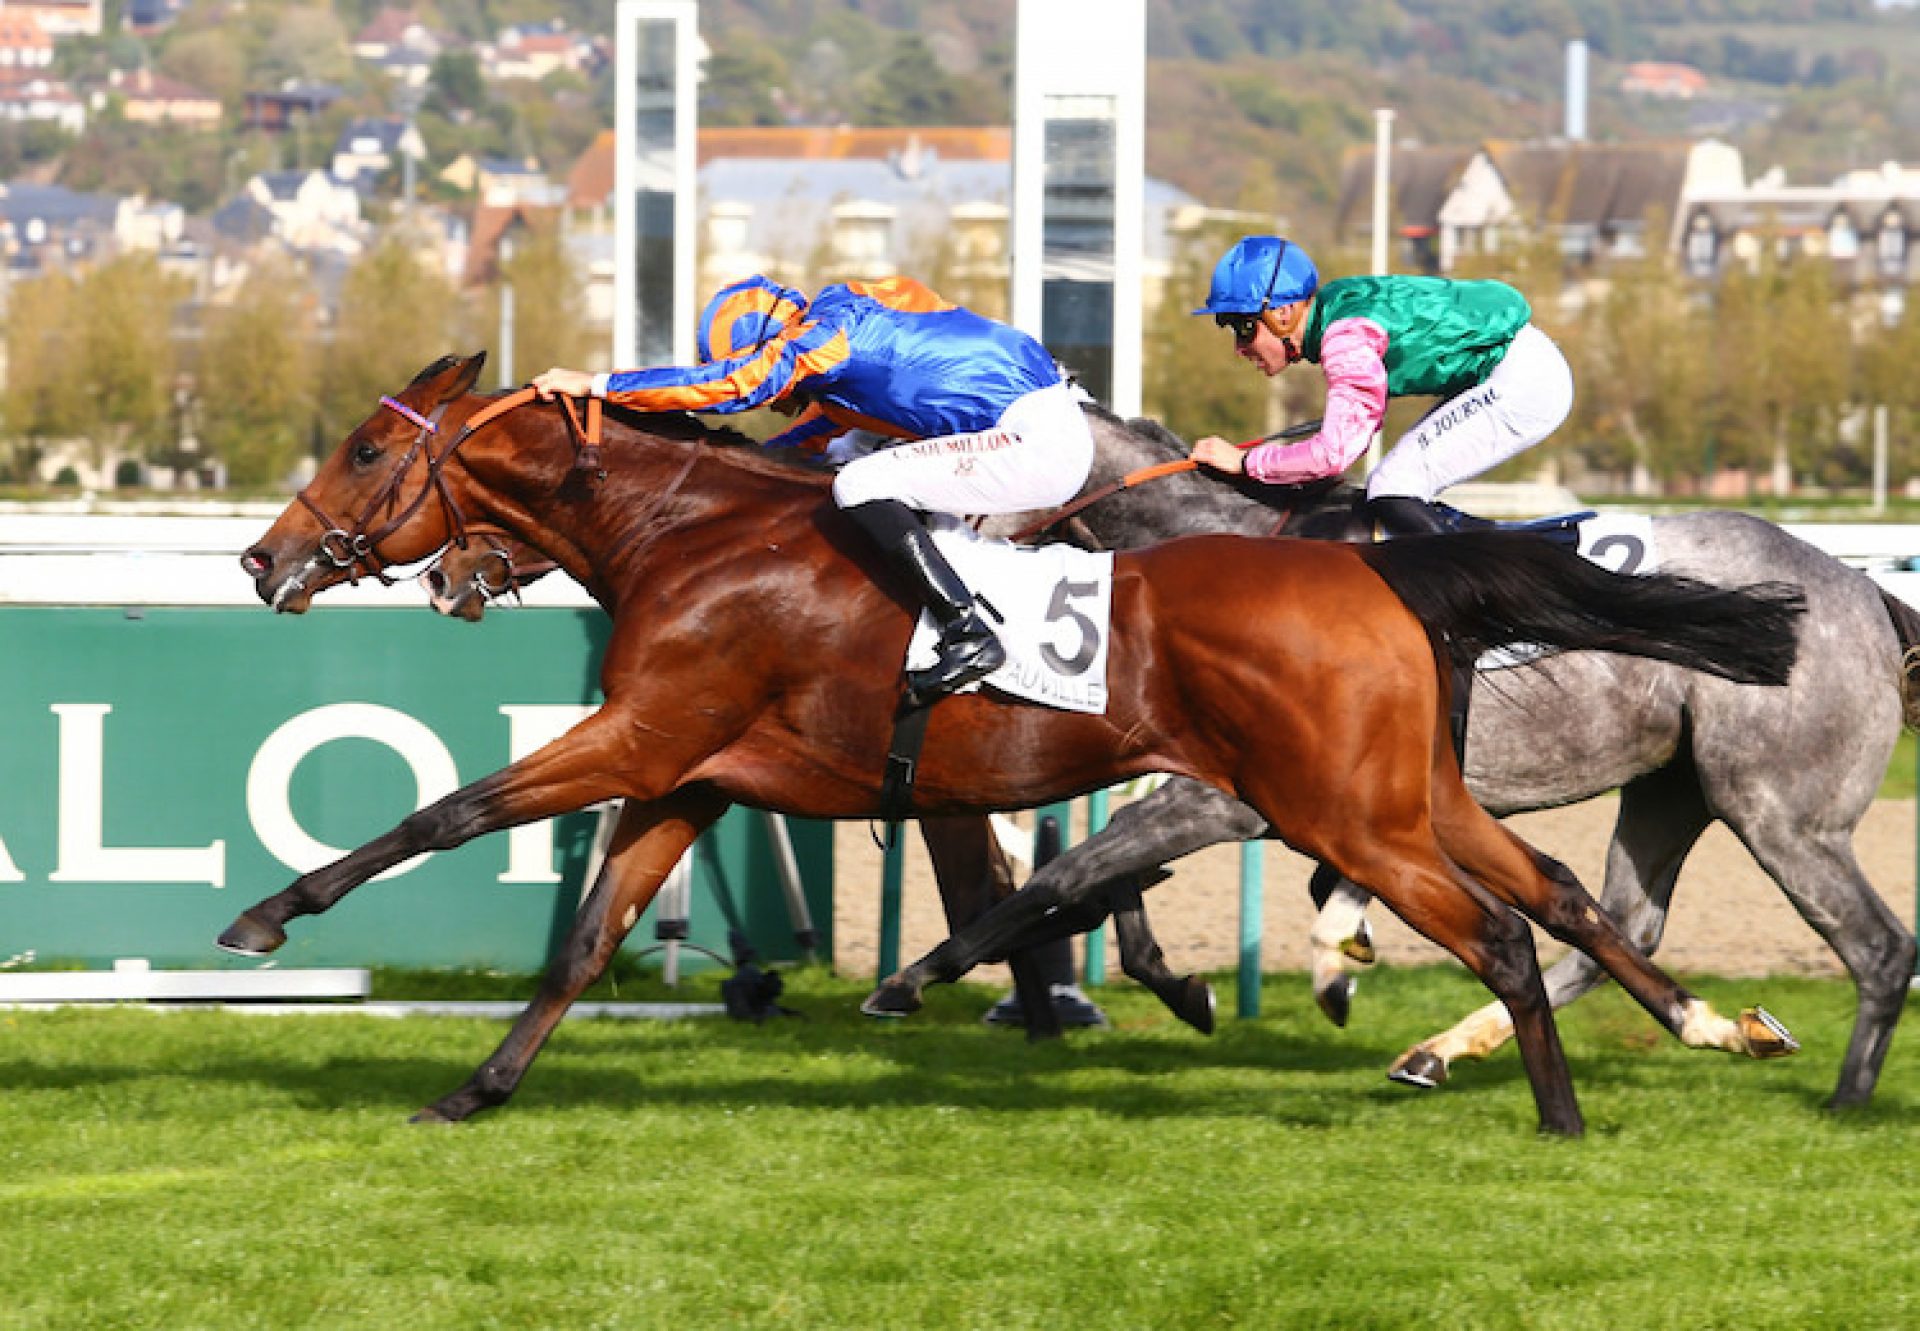 King Of Leogrance (Camelot) winning the Listed Prix Vulcain at Deauville